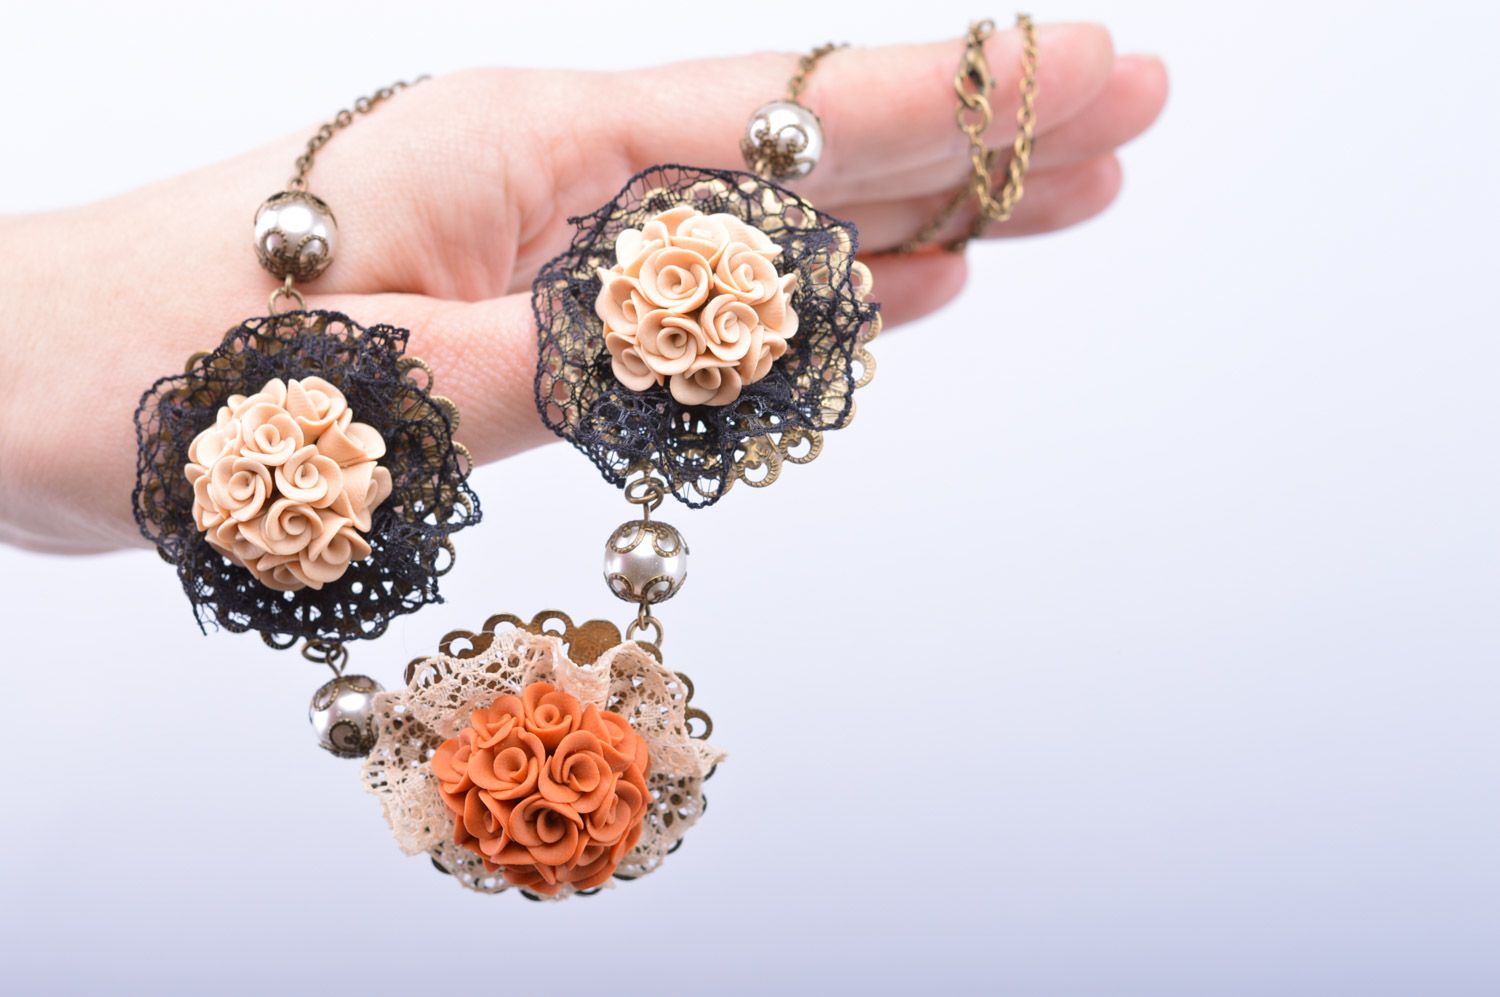 How to Make Polymer Clay Flowers for Jewelry / The Beading Gem